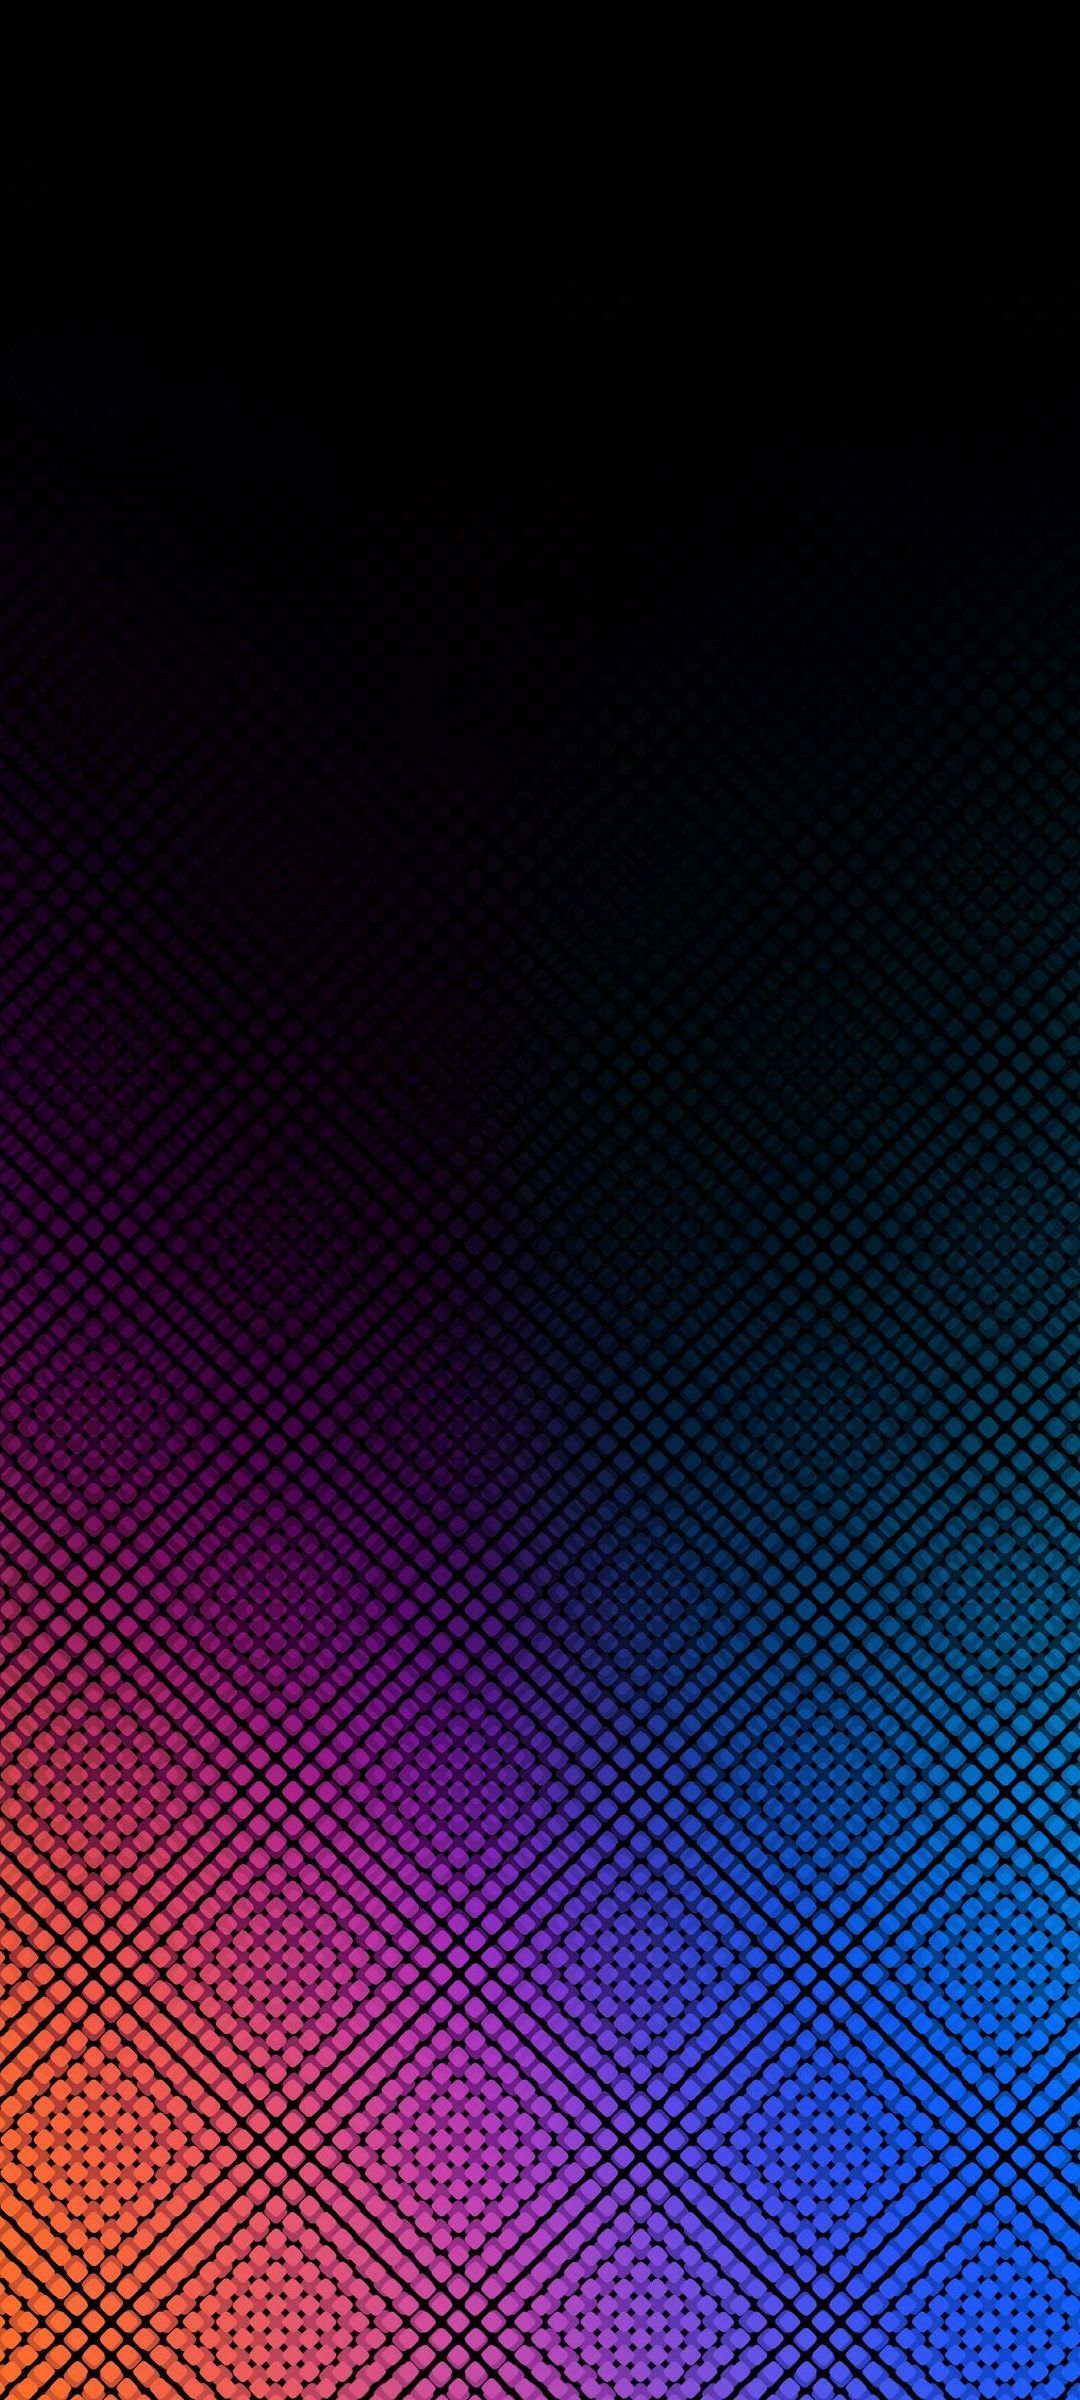 IPhone wallpaper with colorful abstract geometric shapes on a black background - VHS